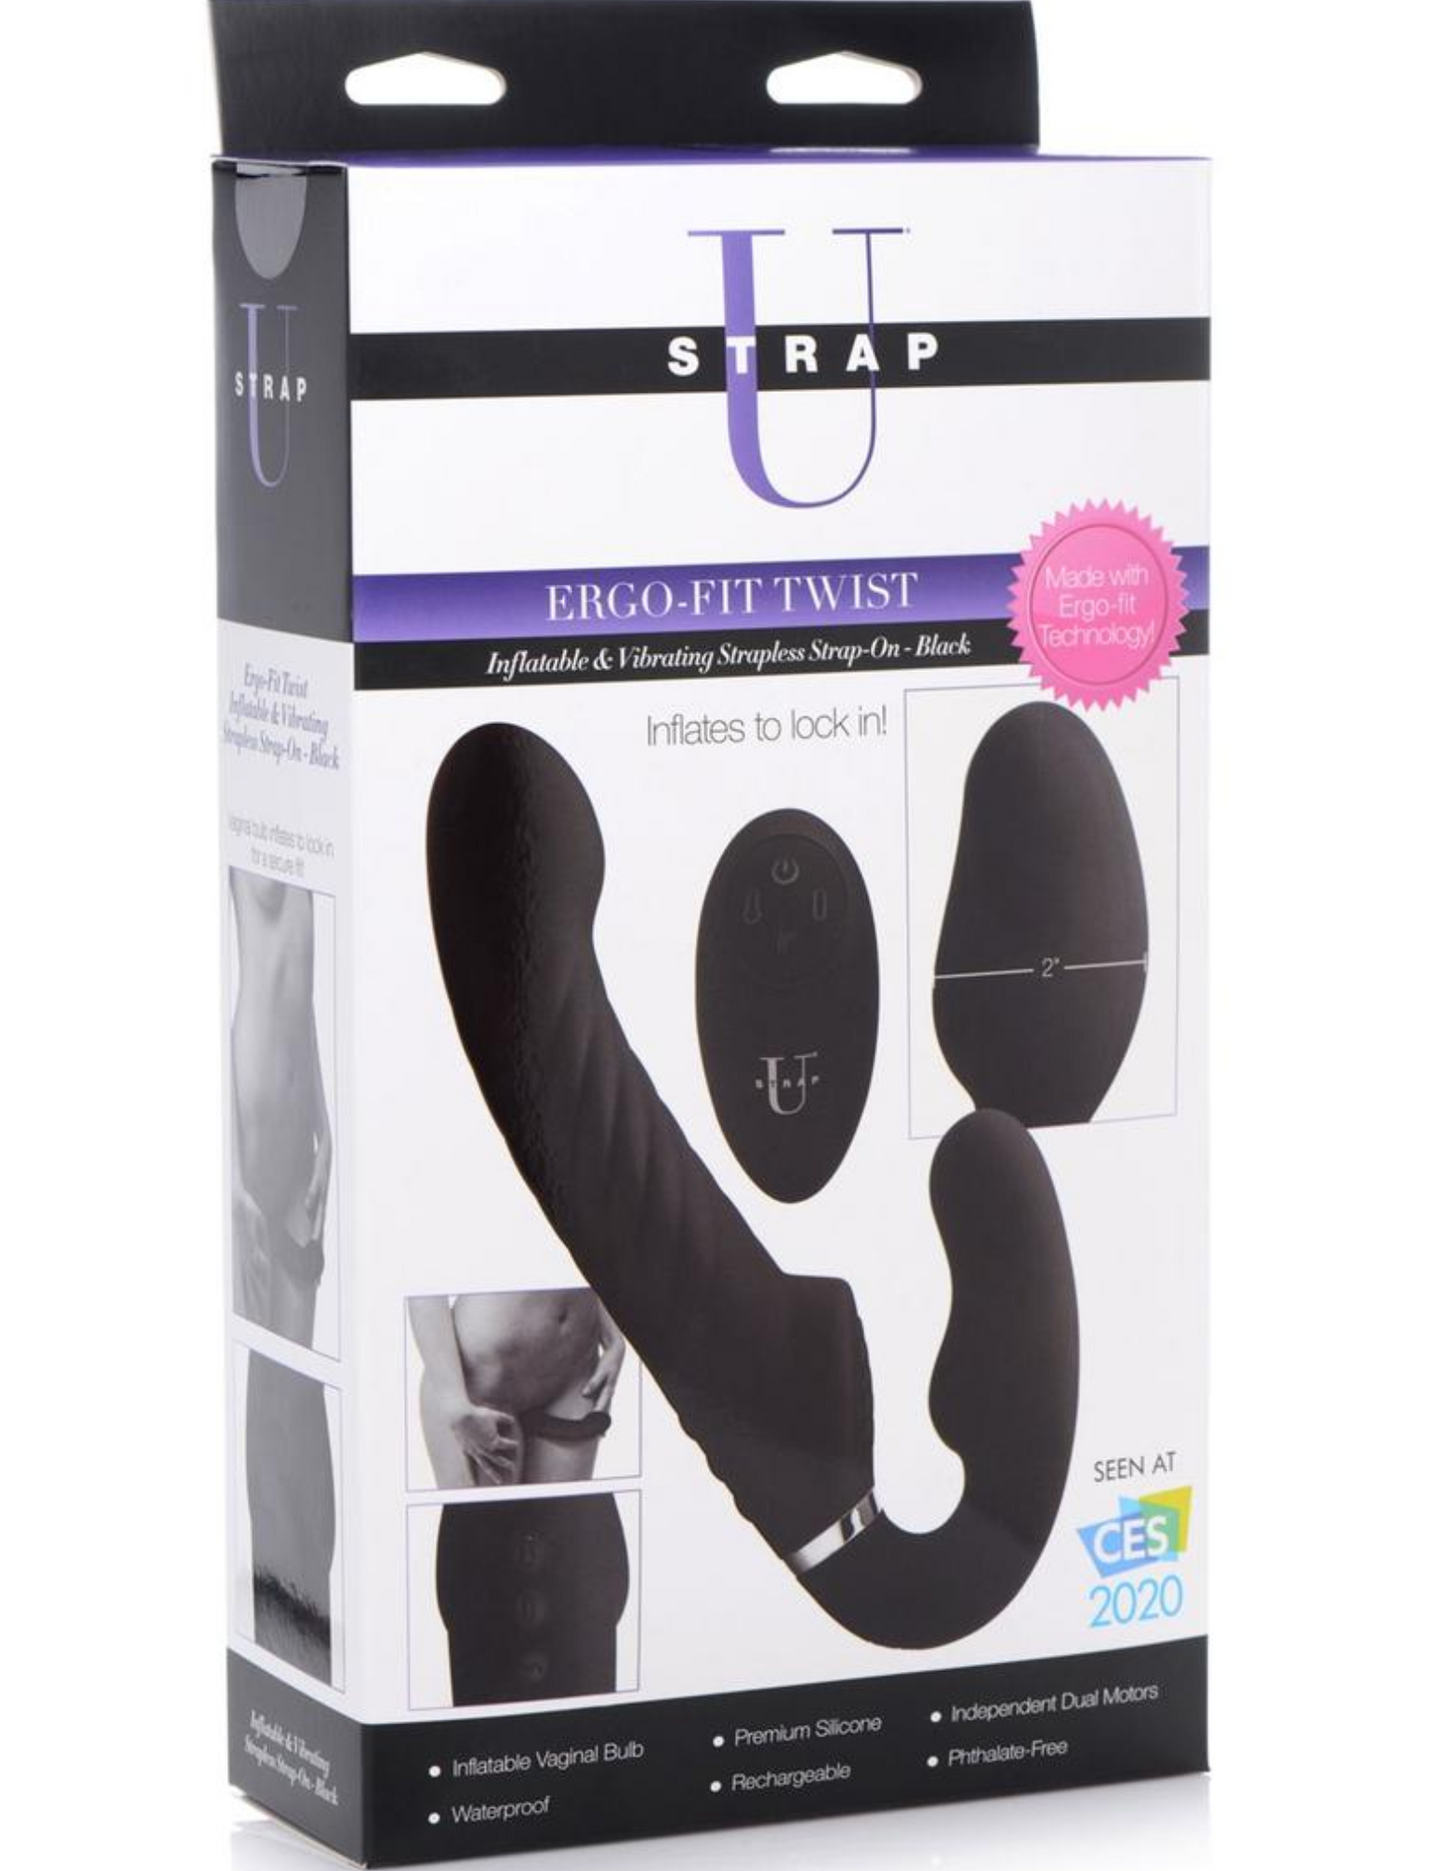 Photo of the front of the box for the Strap U Ergo-Fit Twist Inflatable Strapless Strap-On from XR Brands (black).